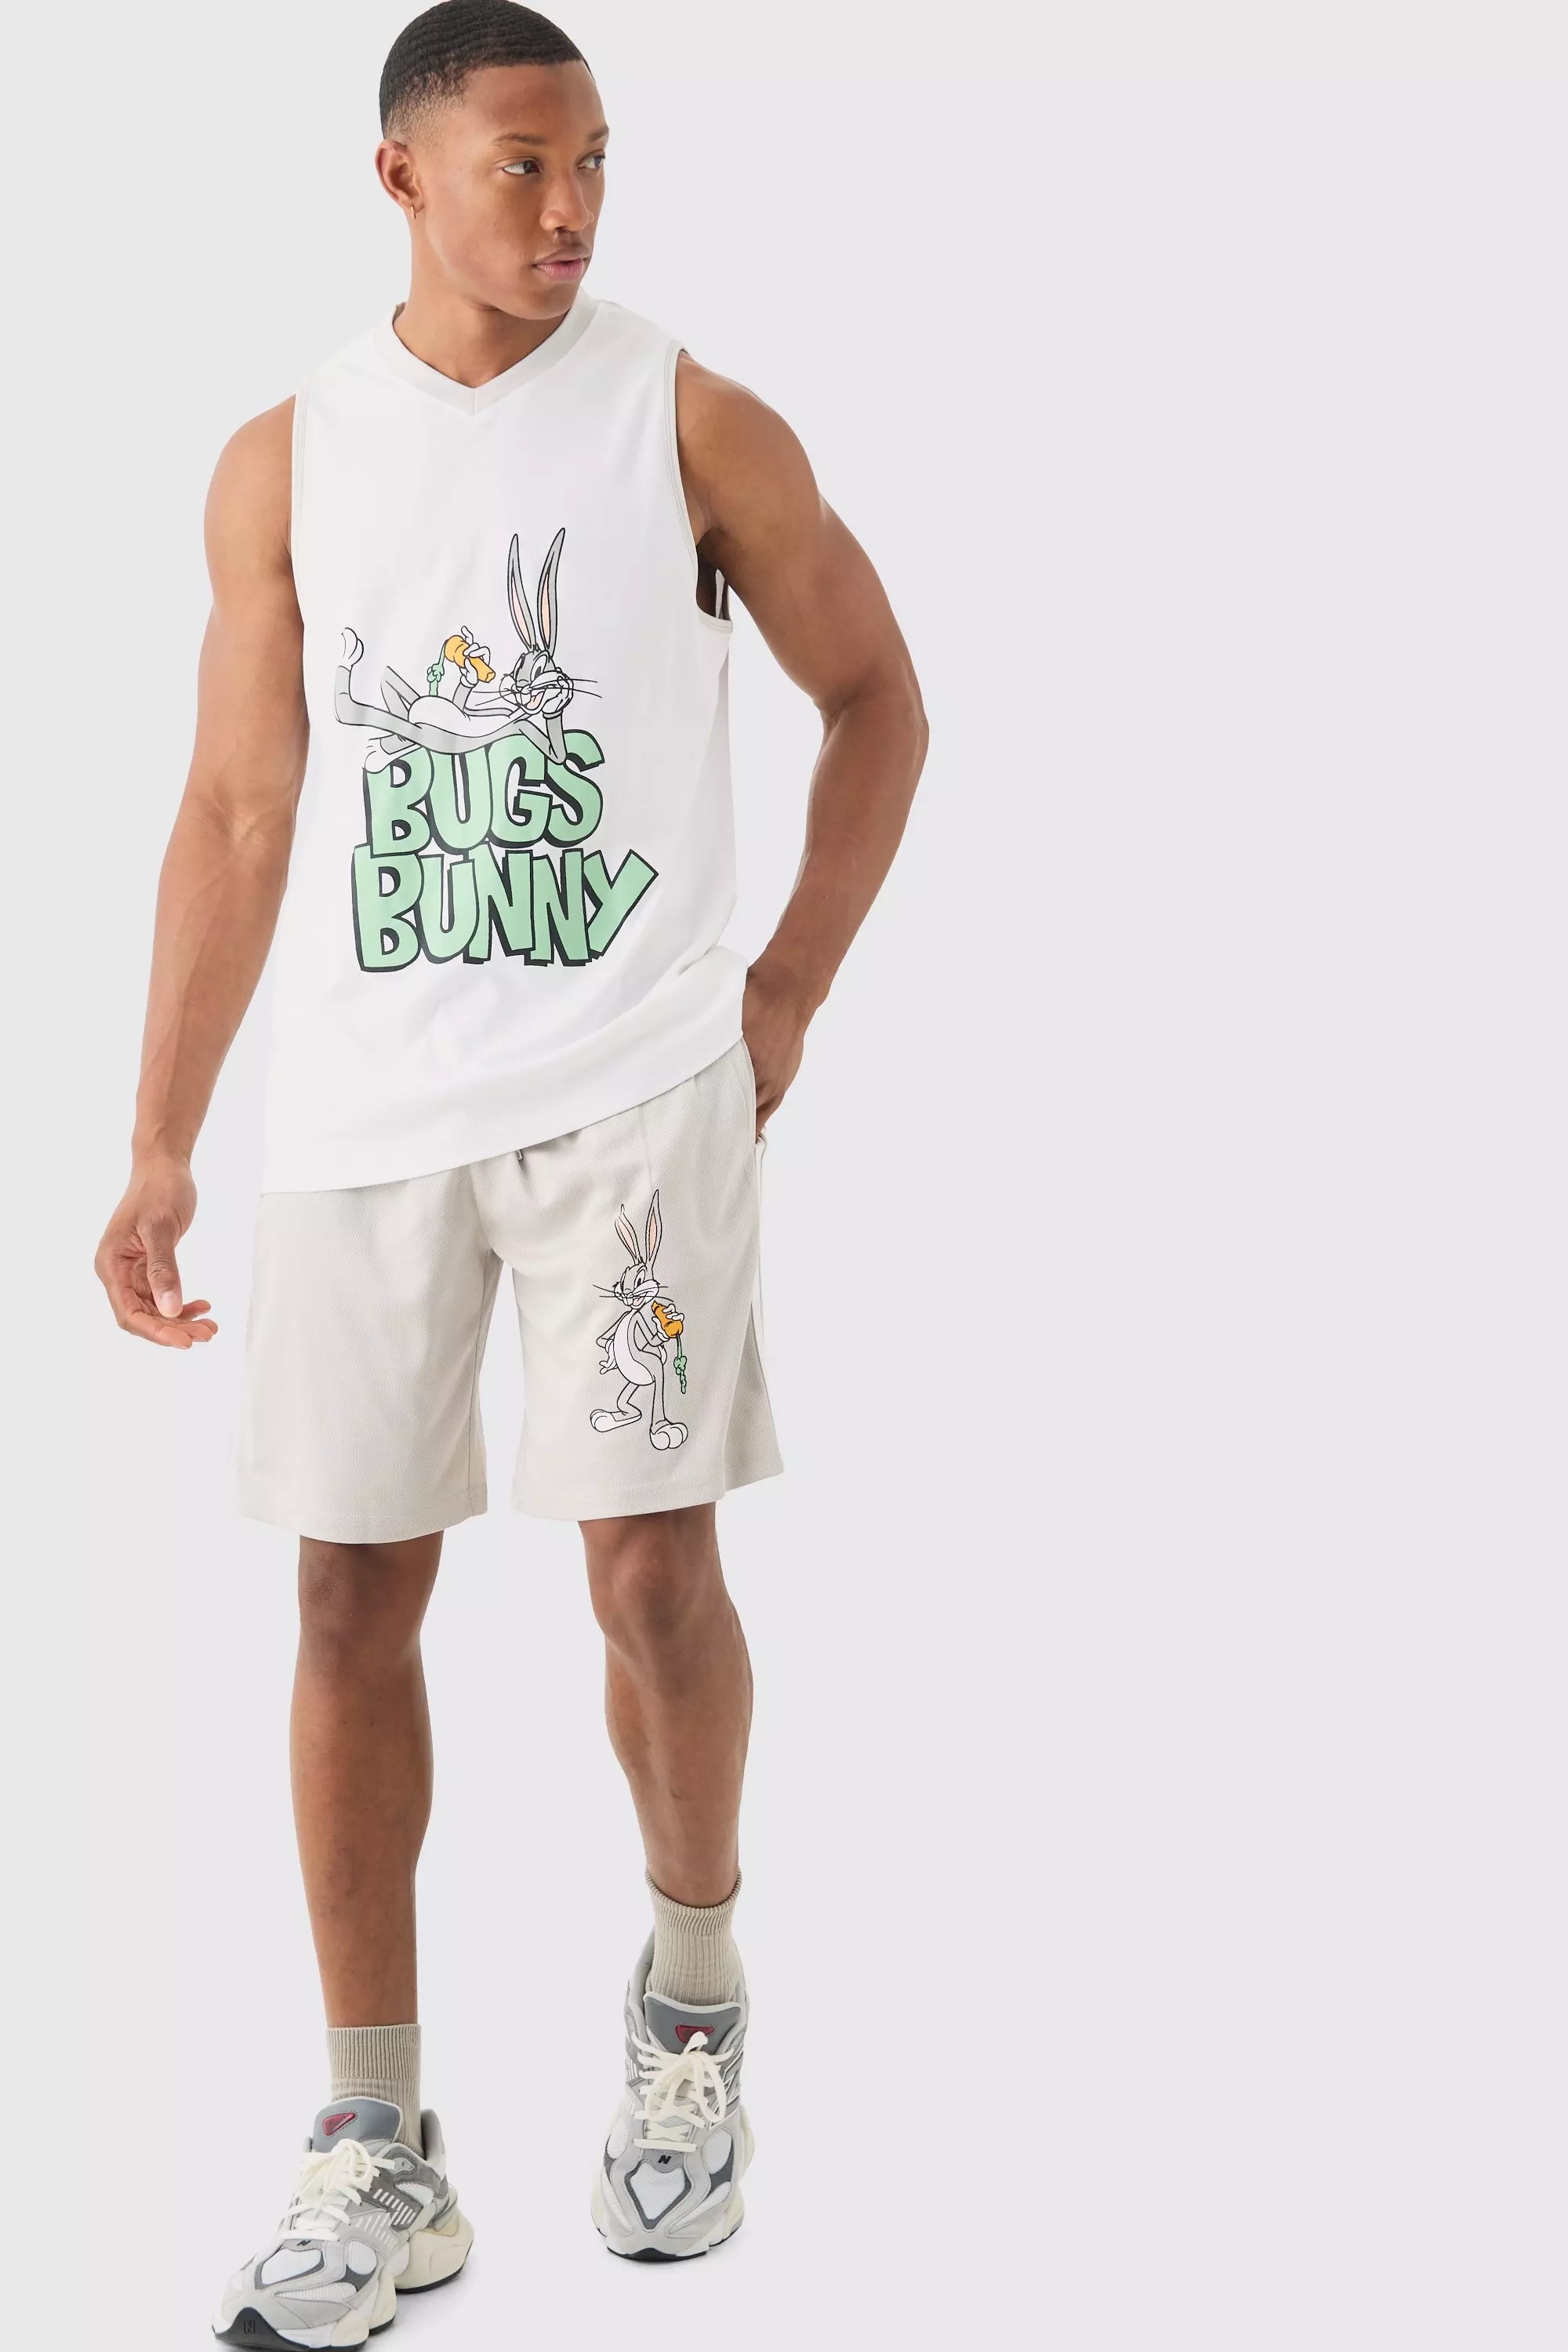 Oversized Bugs Bunny Looney Tunes License Vest And Short Set Grey